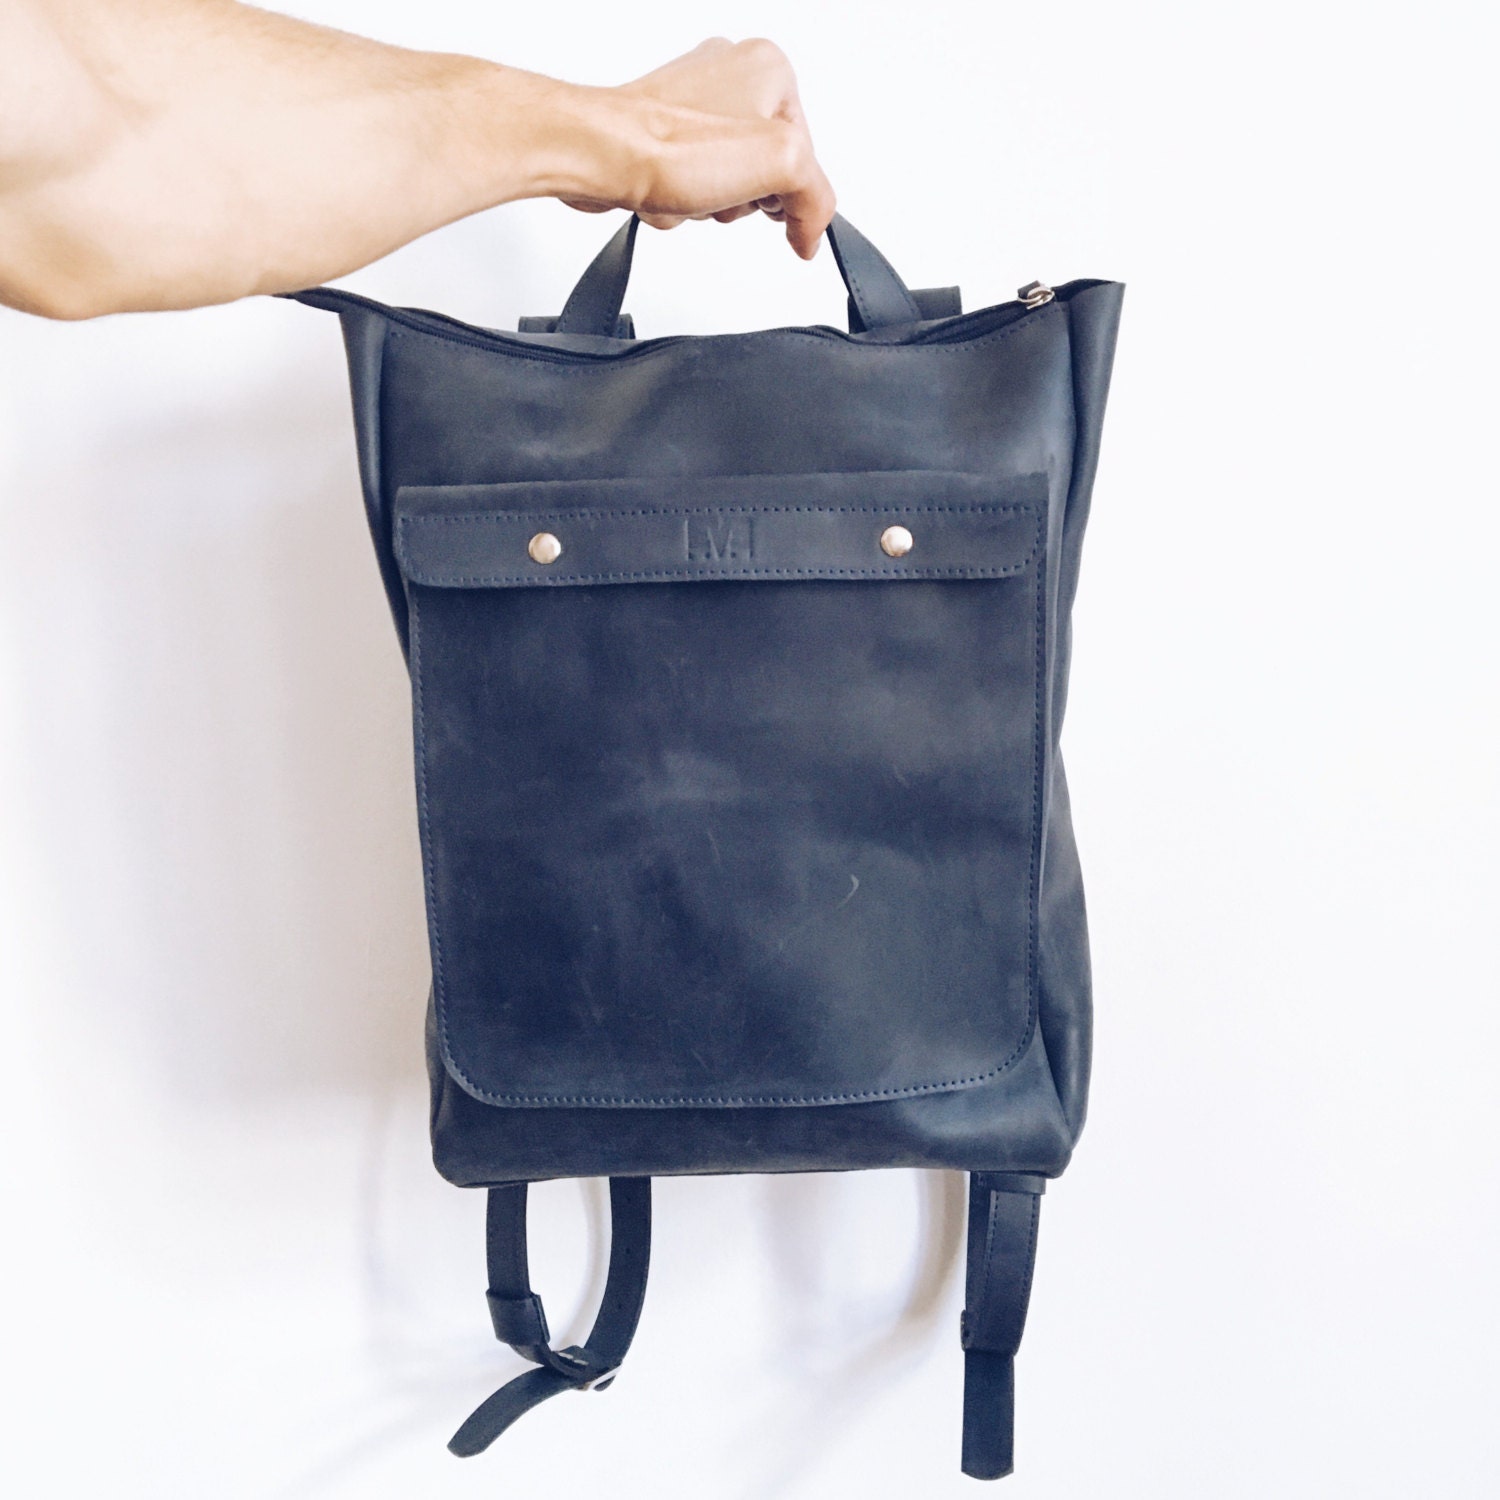 HandMade Dark BLUE LEATHER BACKPACK / Handcrafted leather